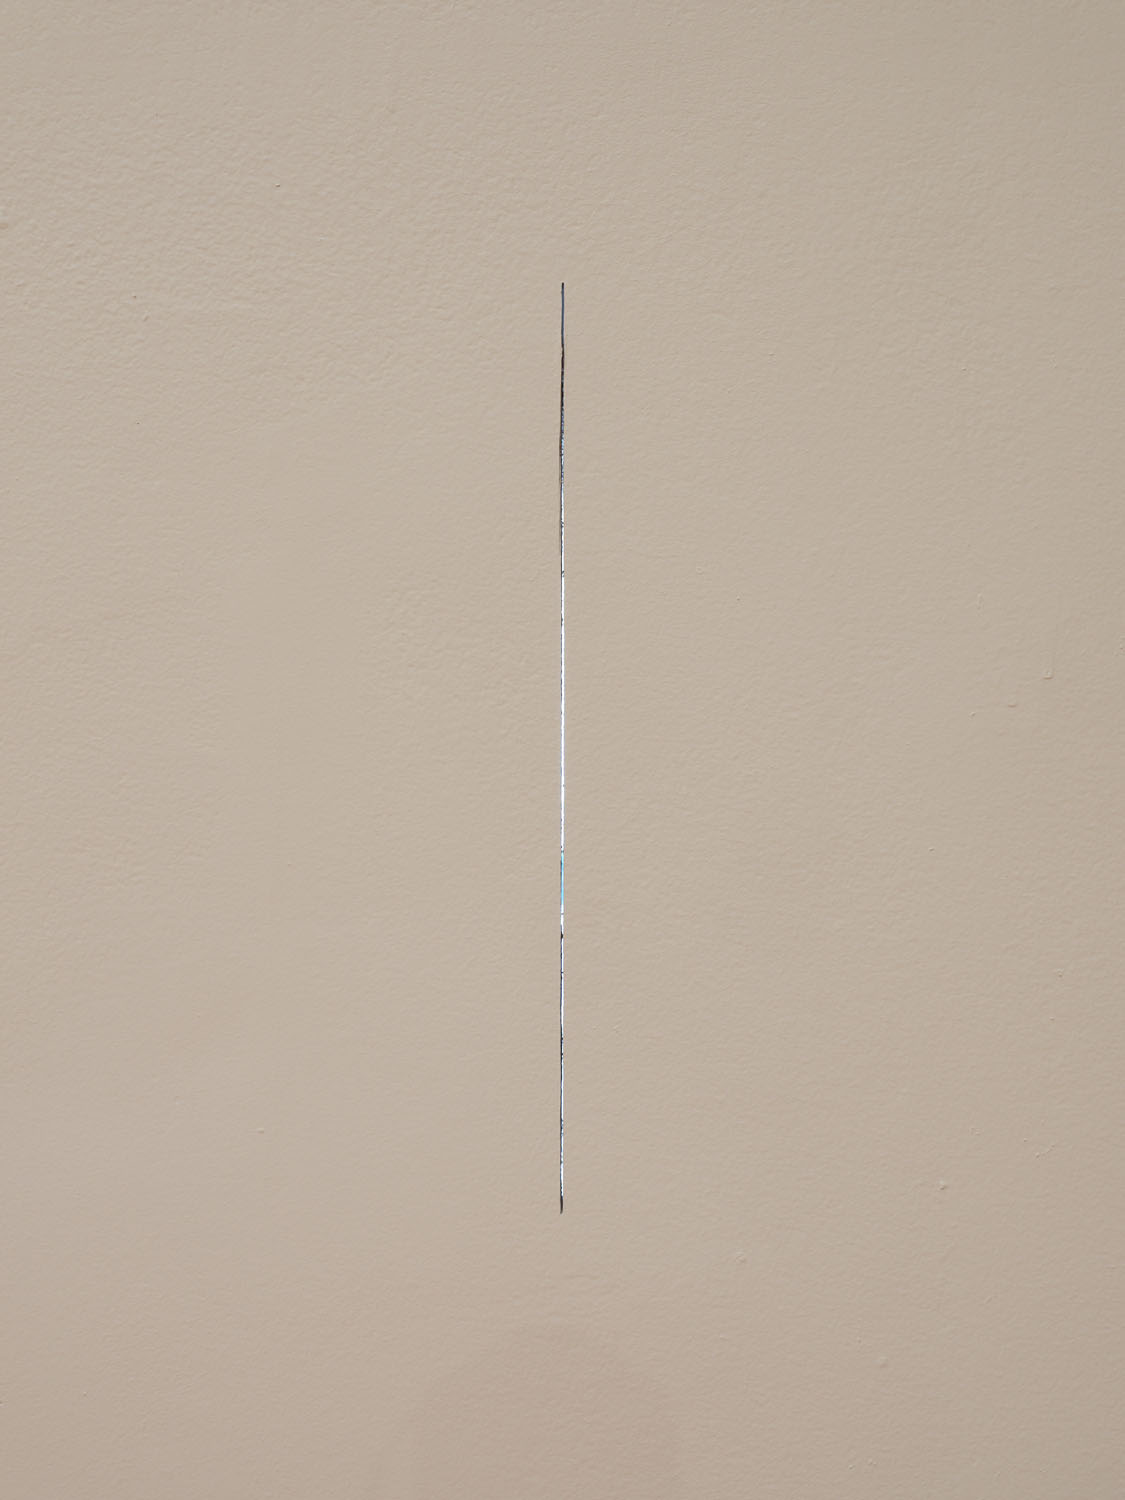   Outside-In, Inside-Out, ( detail,)   2018, line cut through perimeter museum wall, sheetrock, paint, 21 x 0.875 x 0.5 inches 